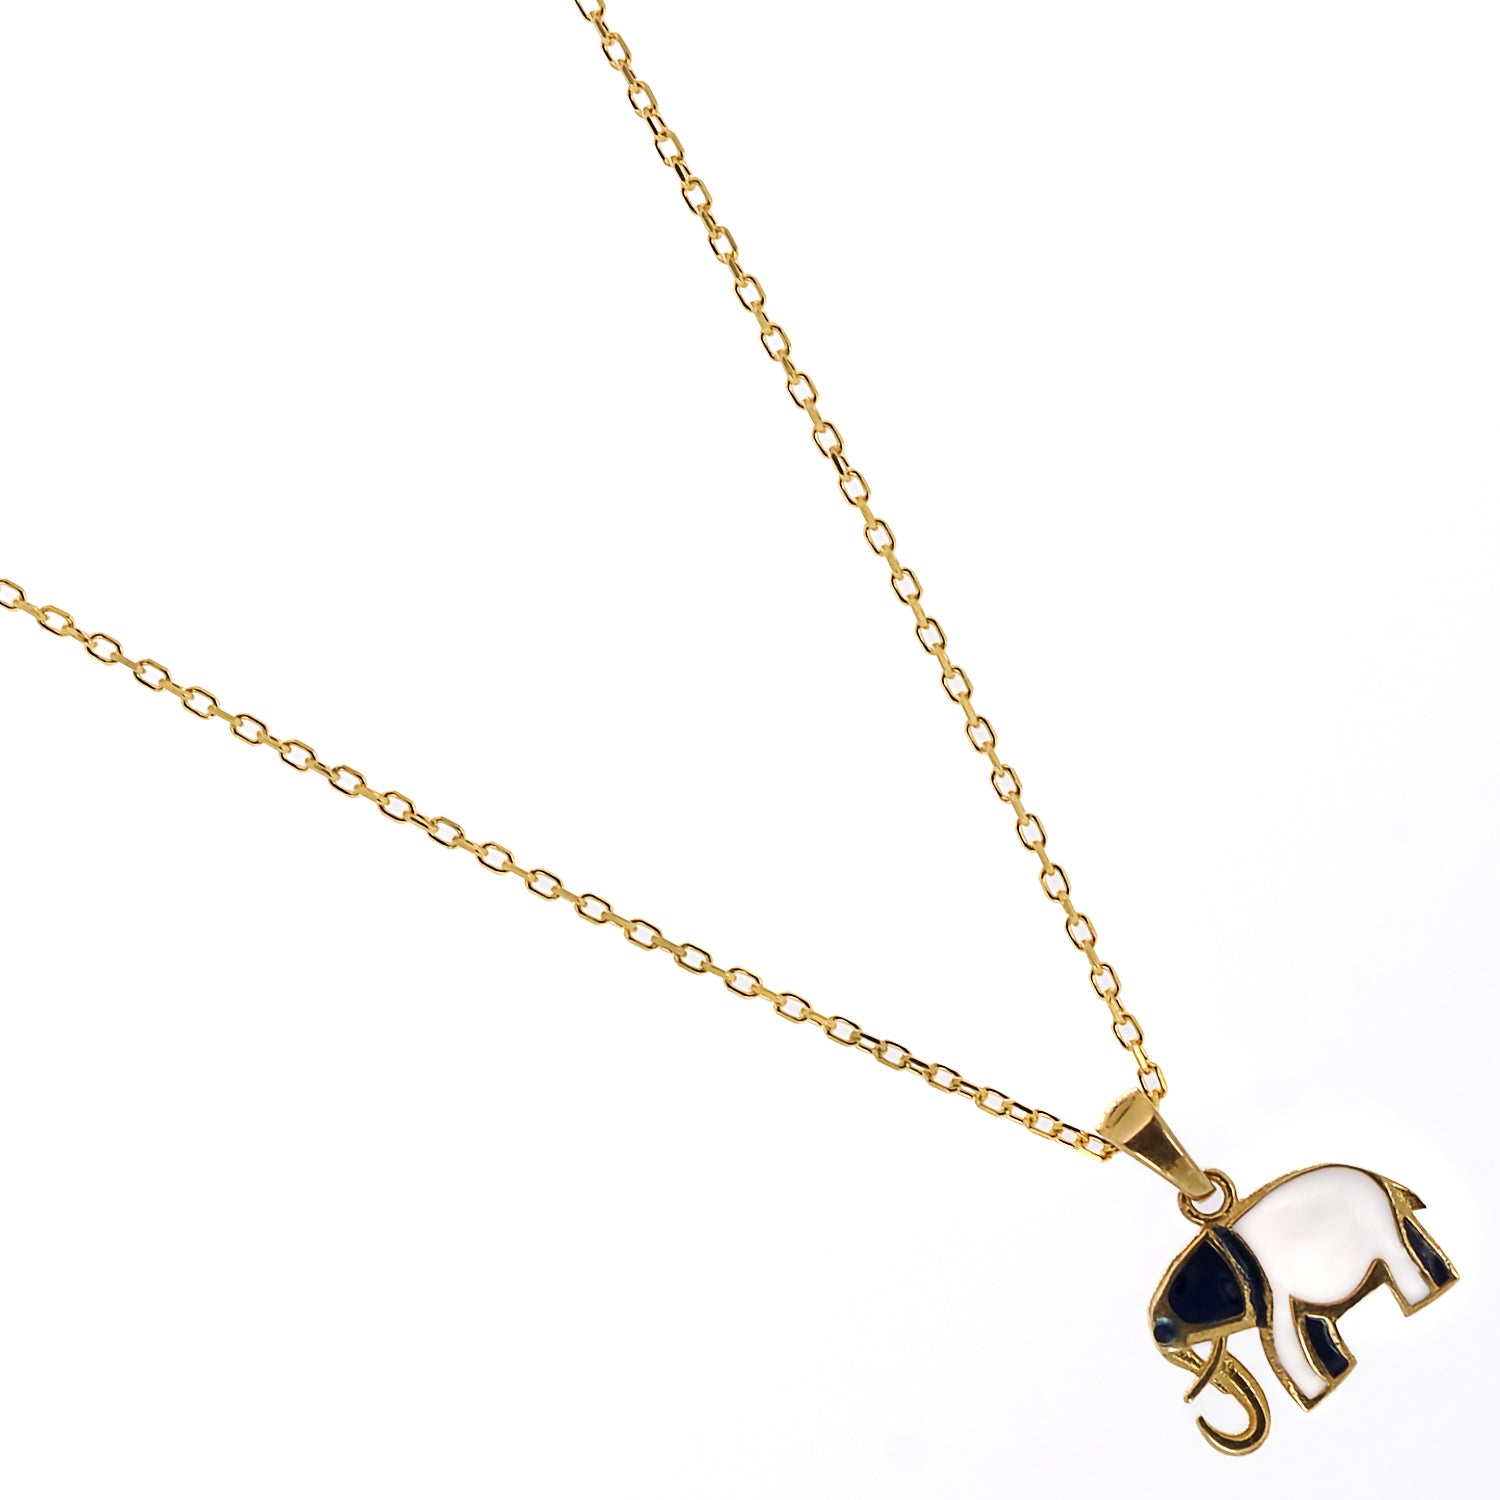 Stylish shot of the Gold Blue And White Elephant Necklace, showcasing its unique design and meaningful symbolism.